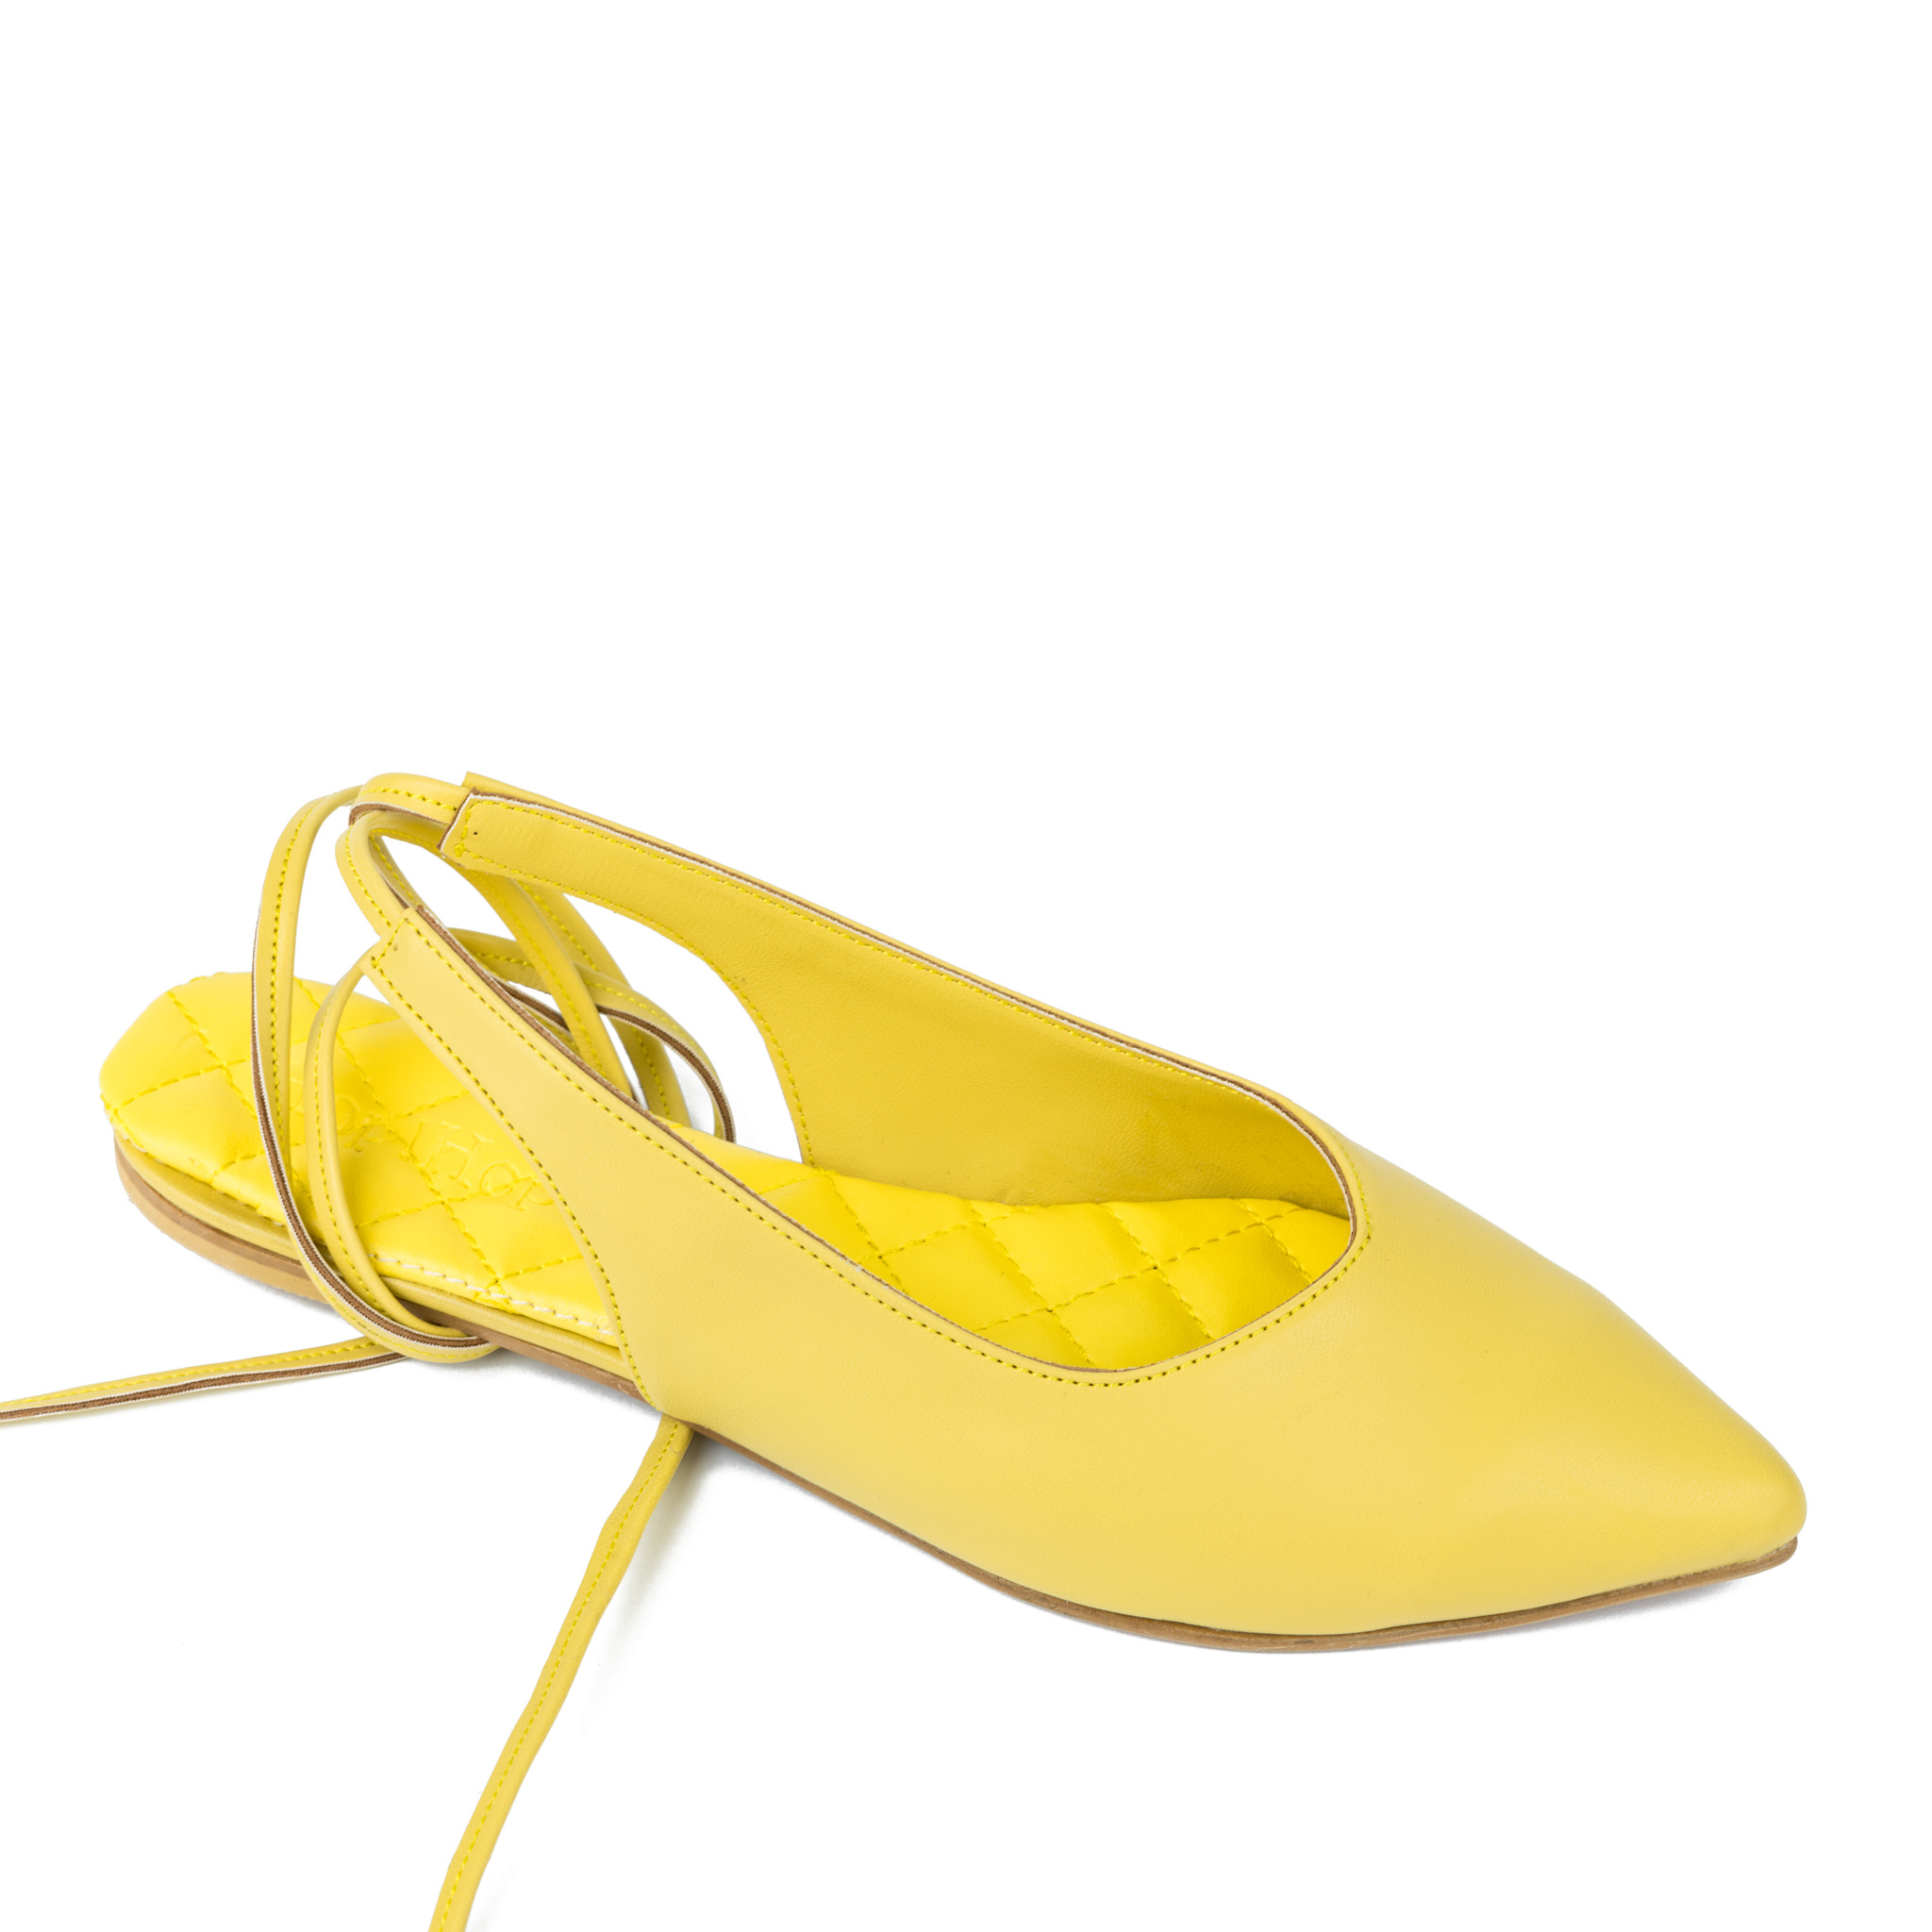 POINTED LACE UP SANDALS - YELLOW